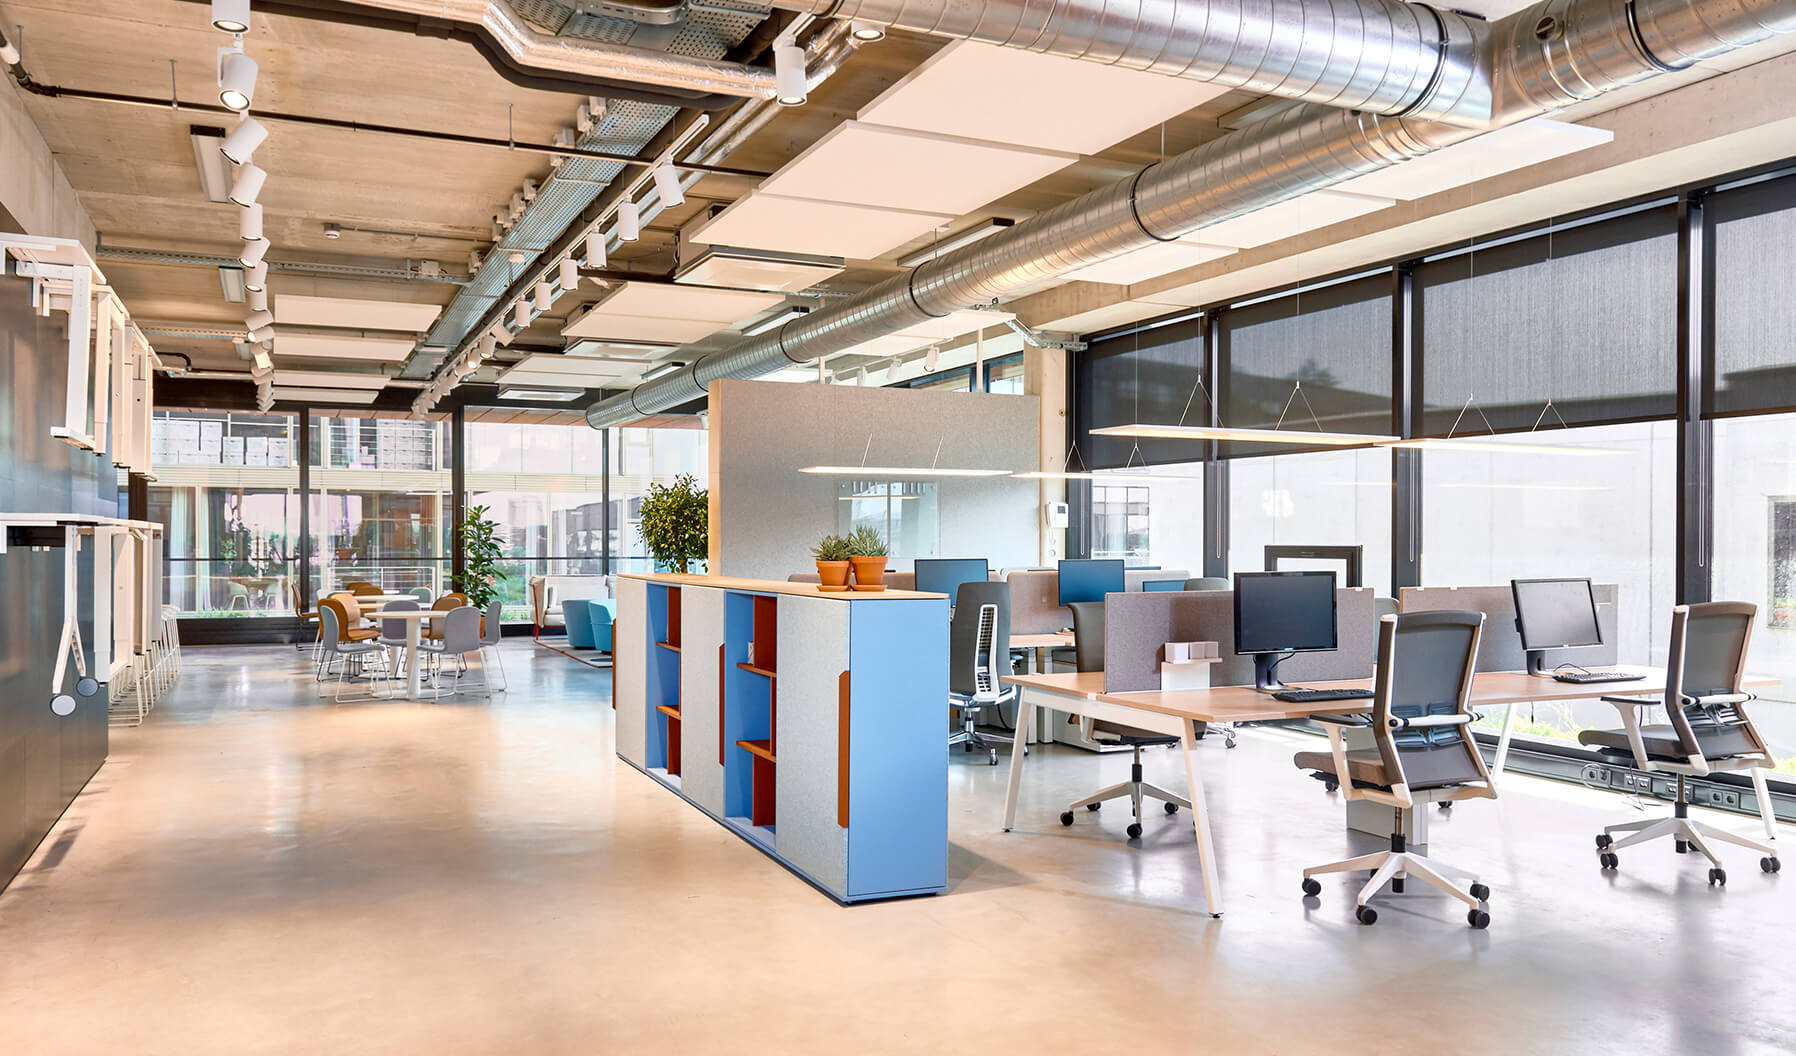 Service teams have dedicated workstations which are independently adjustable. The second bench offers an touchdown collaborative space for spontaneous discussions.